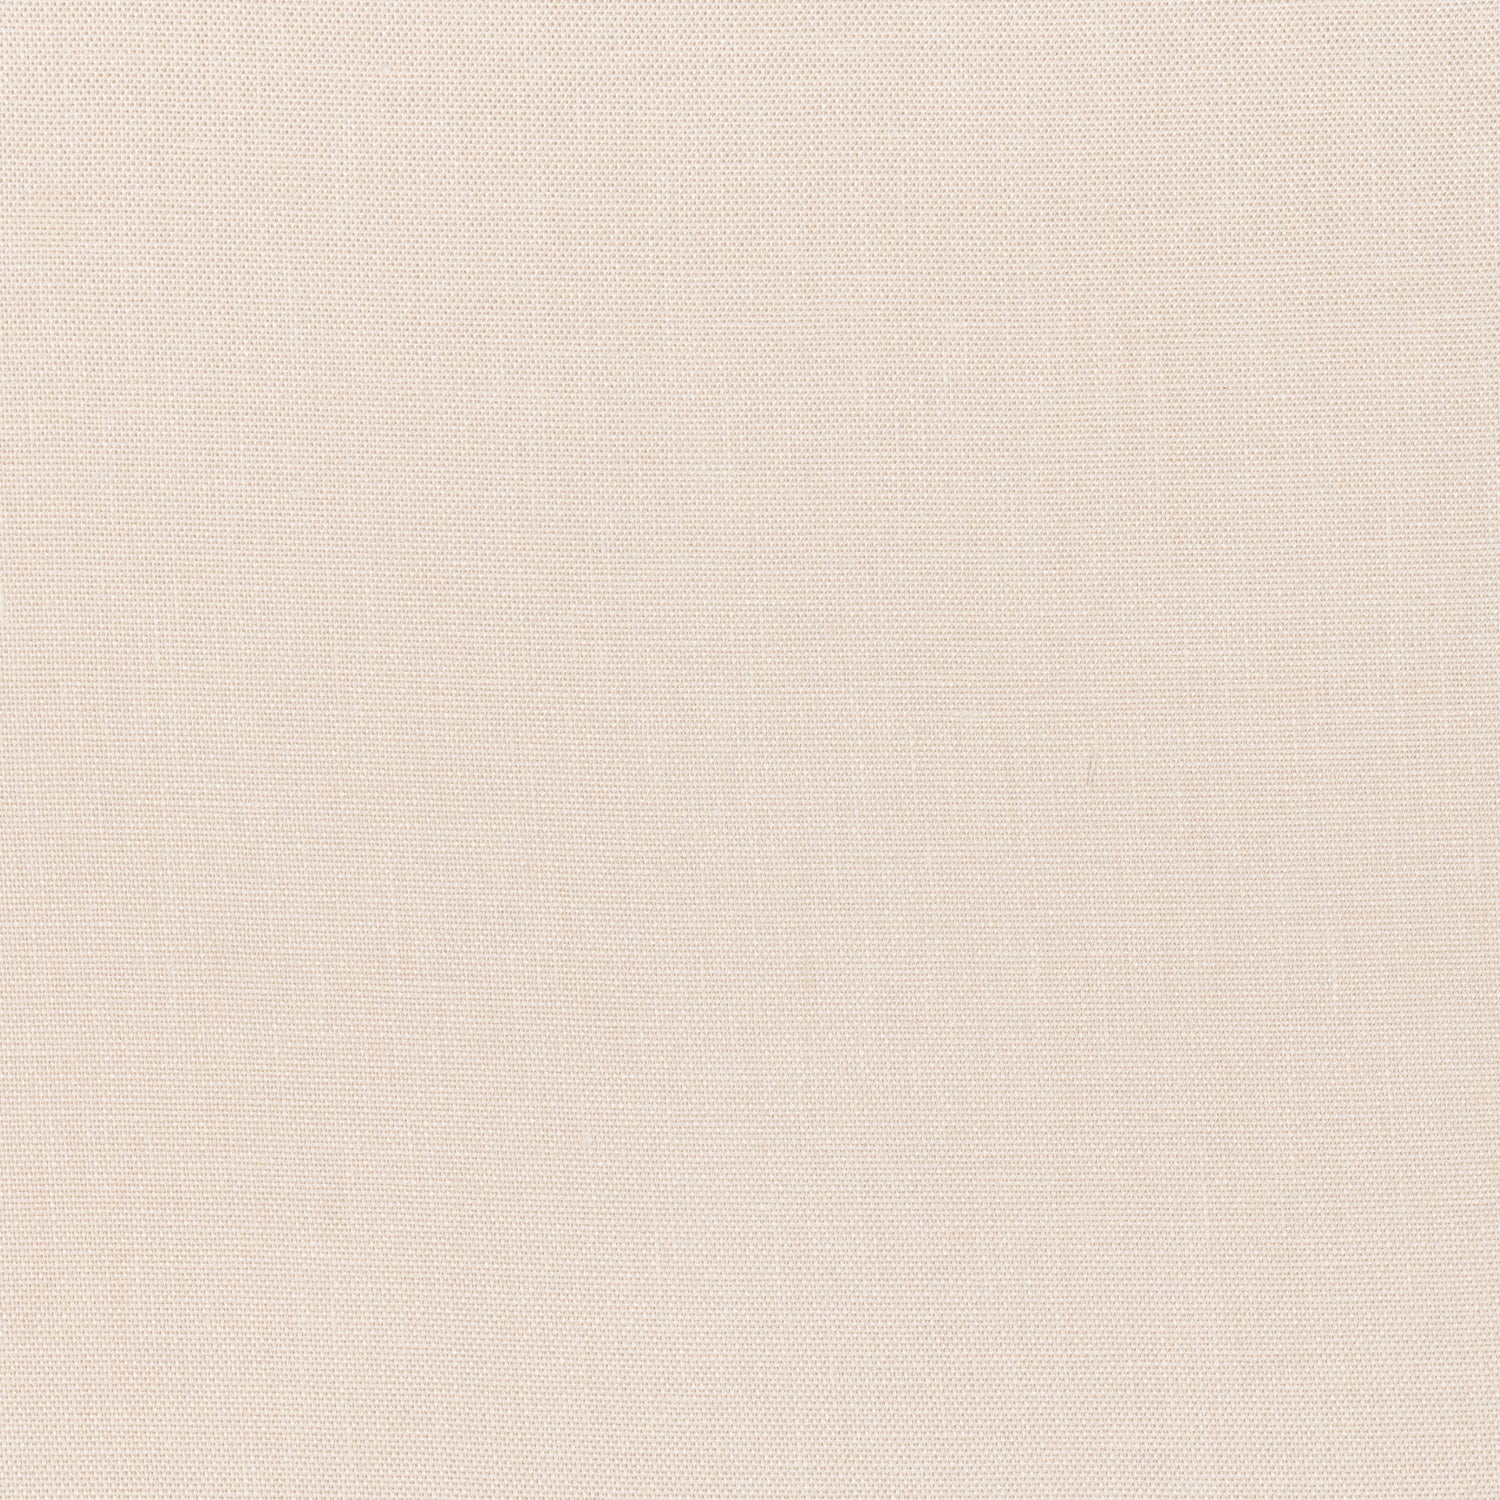 Skye Linen fabric in blush color - pattern number FWW7608 - by Thibaut in the Palisades collection